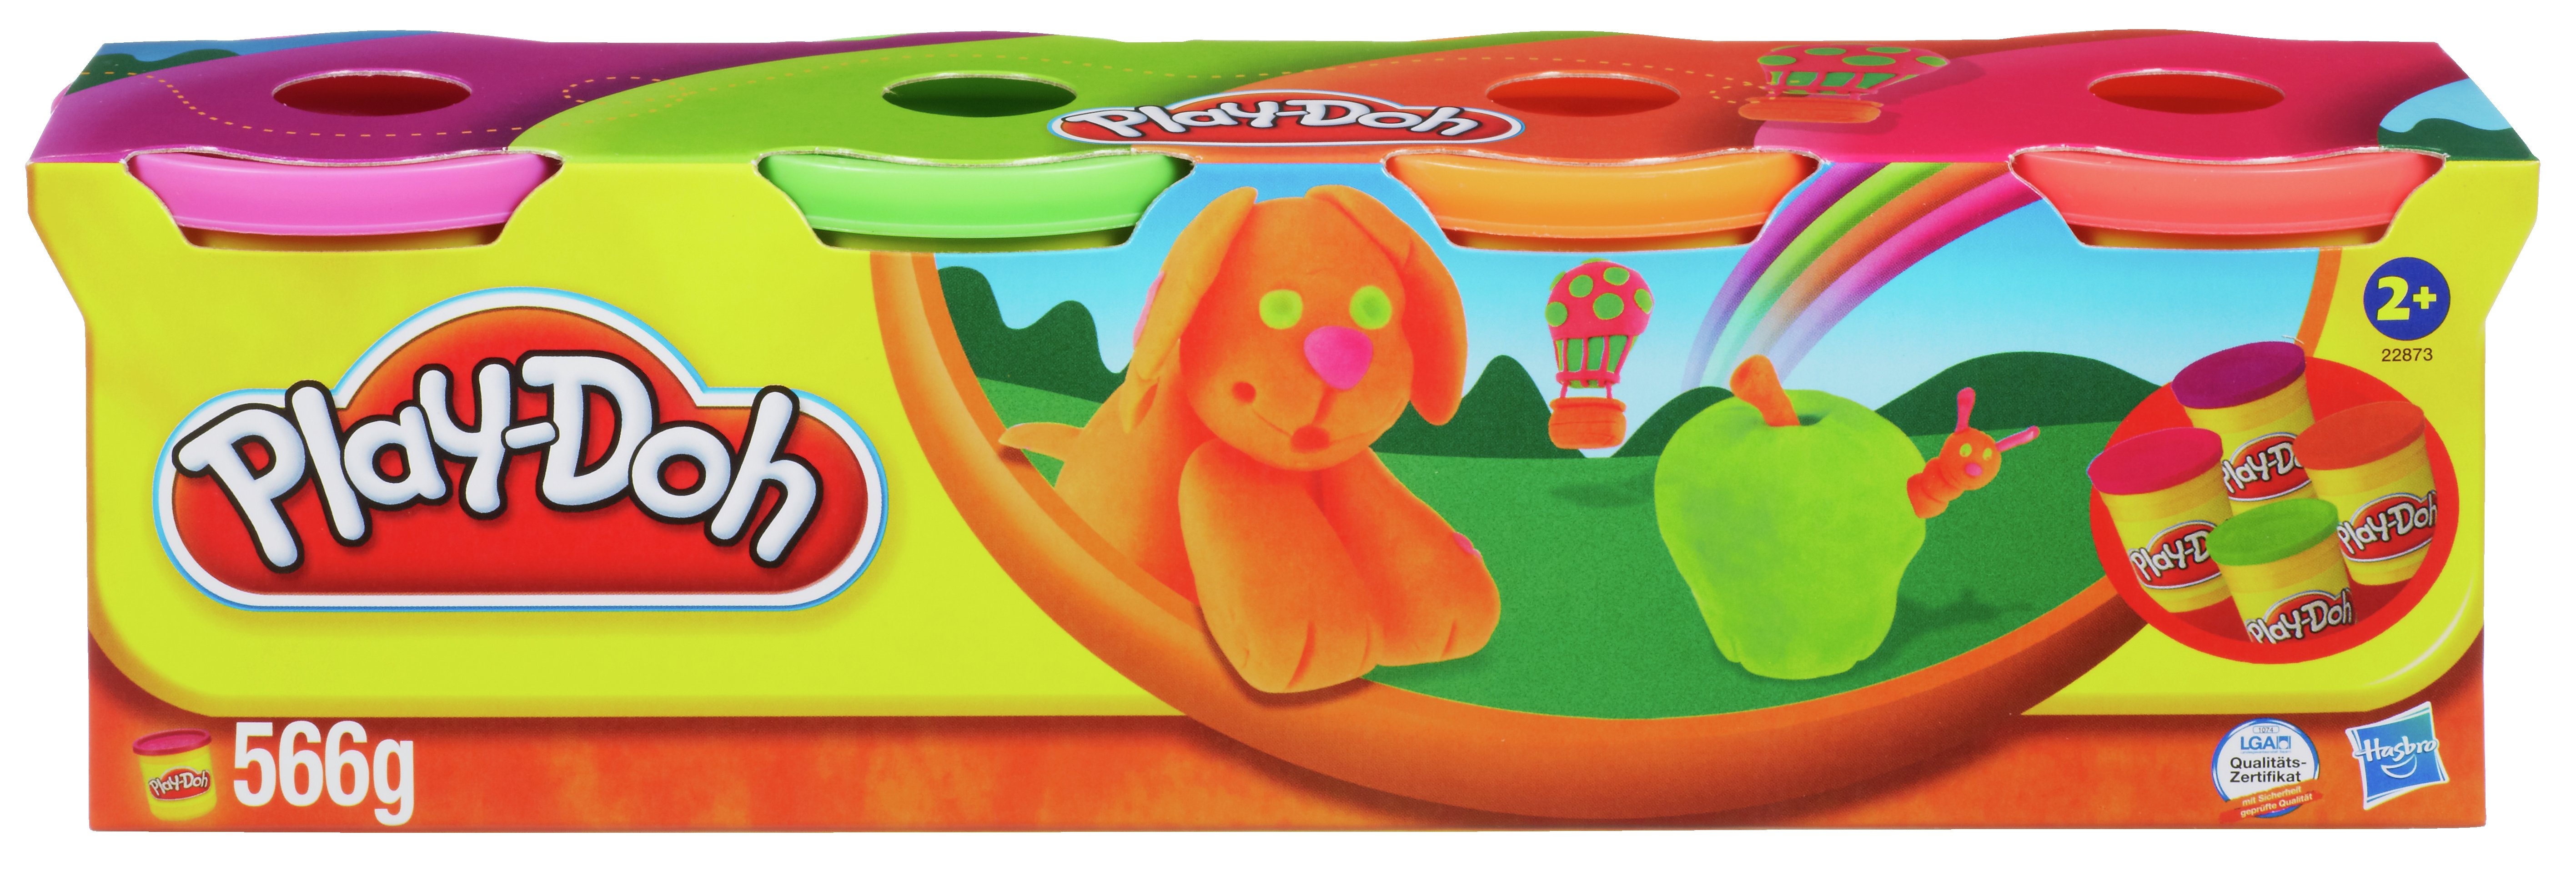 Play Doh Classic Colours 4 Pack Reviews